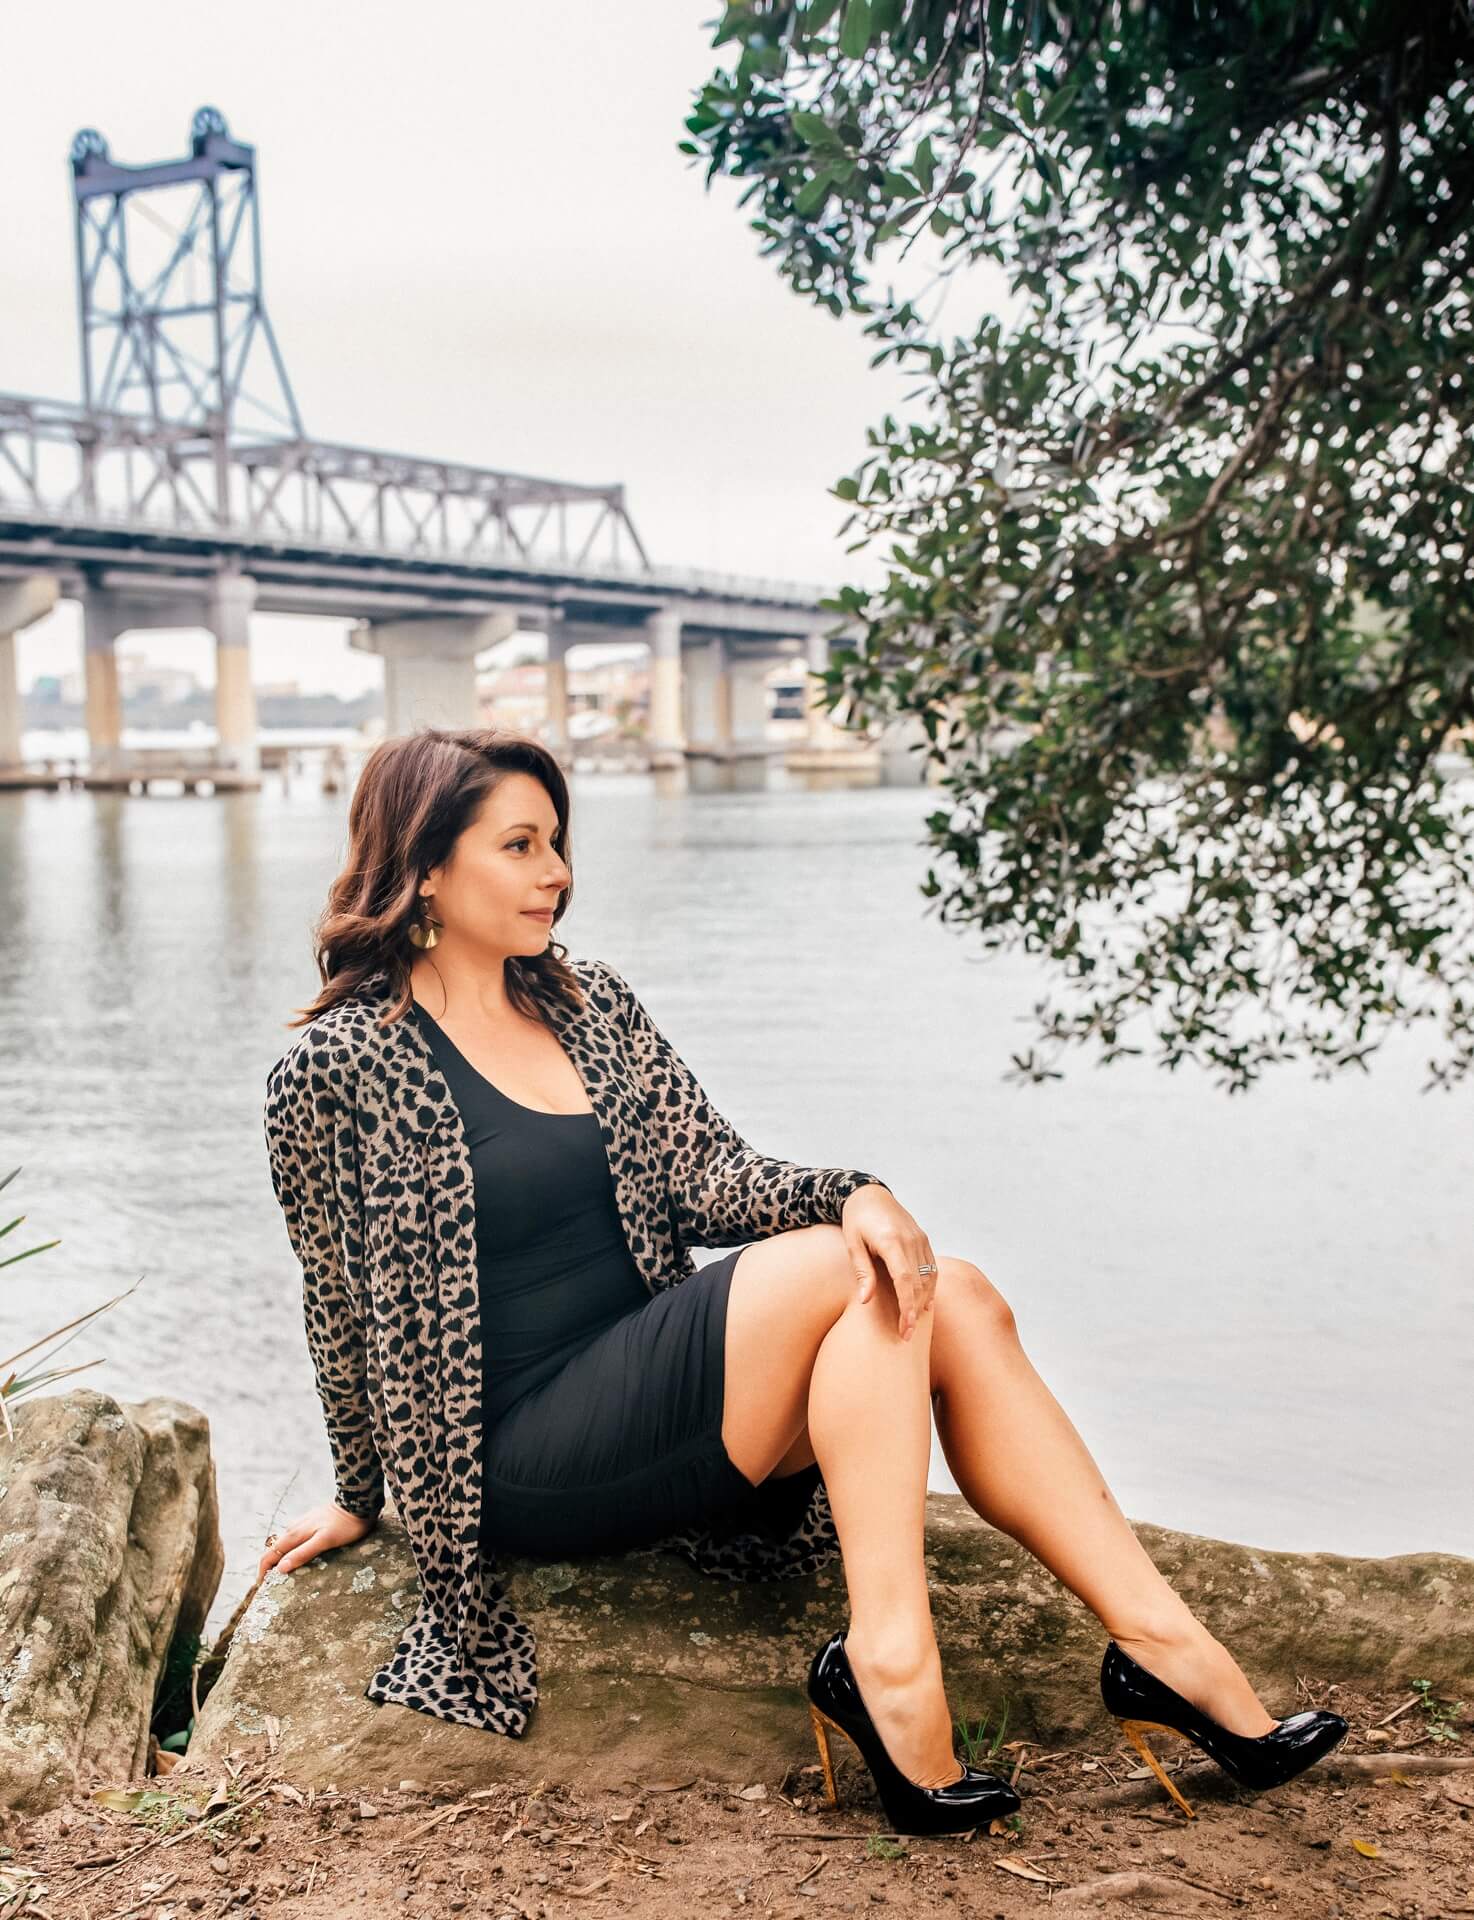 sexually confident woman wearing heels sitting on a rock looking to the side in front of water with a bridge in background